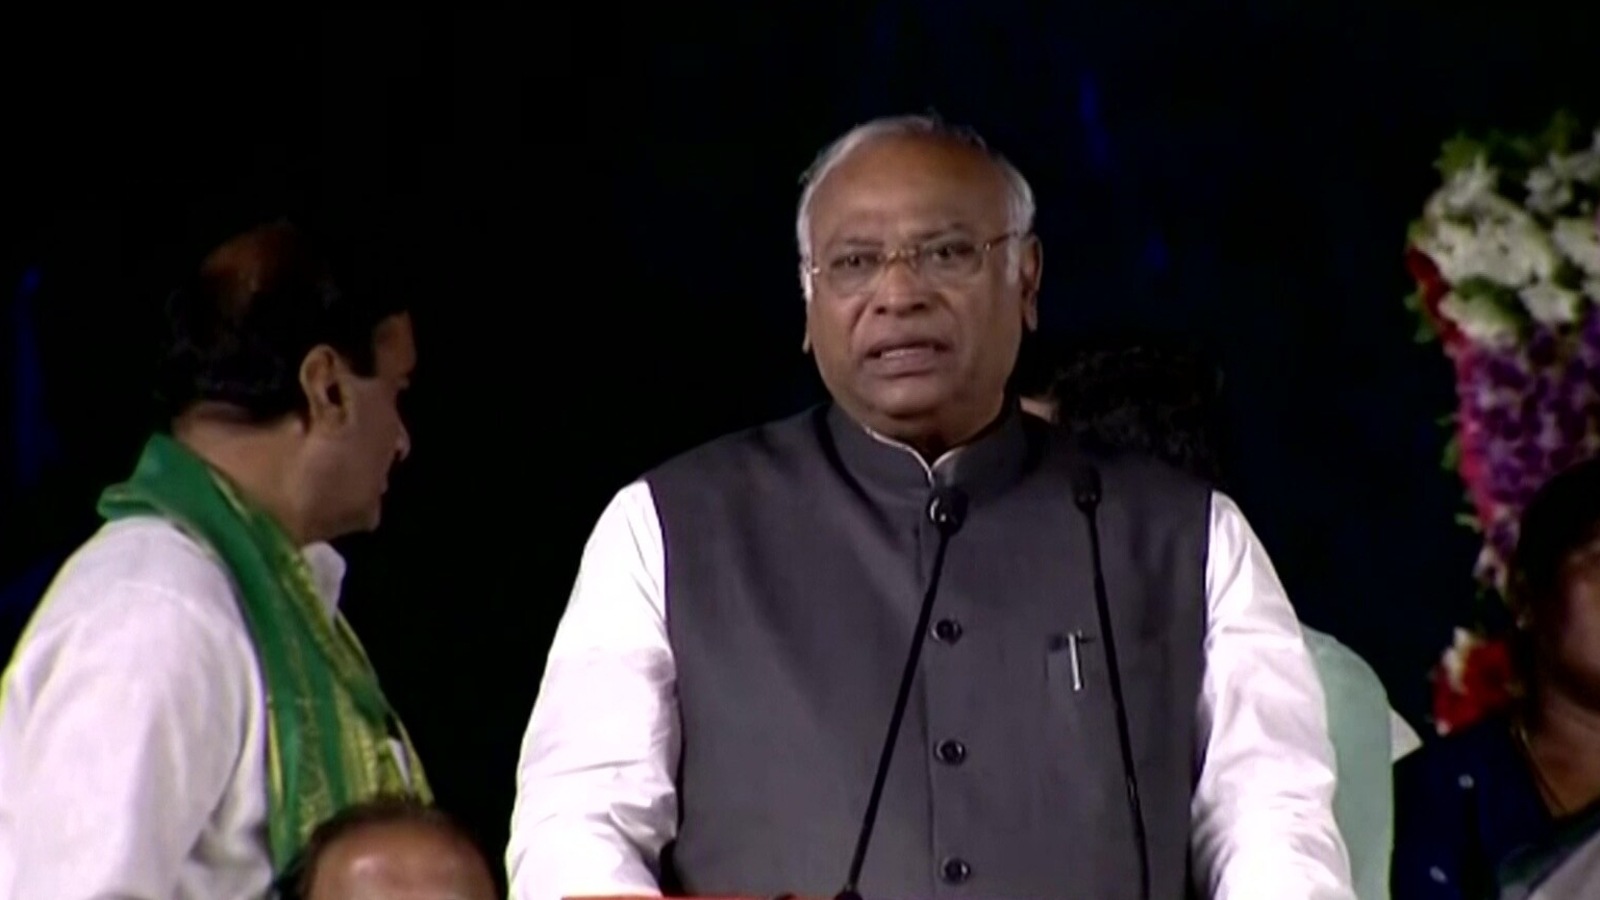 only-congress-under-rahul-gandhi-can-form-non-bjp-govt-kharge-s-message-from-hyderabad